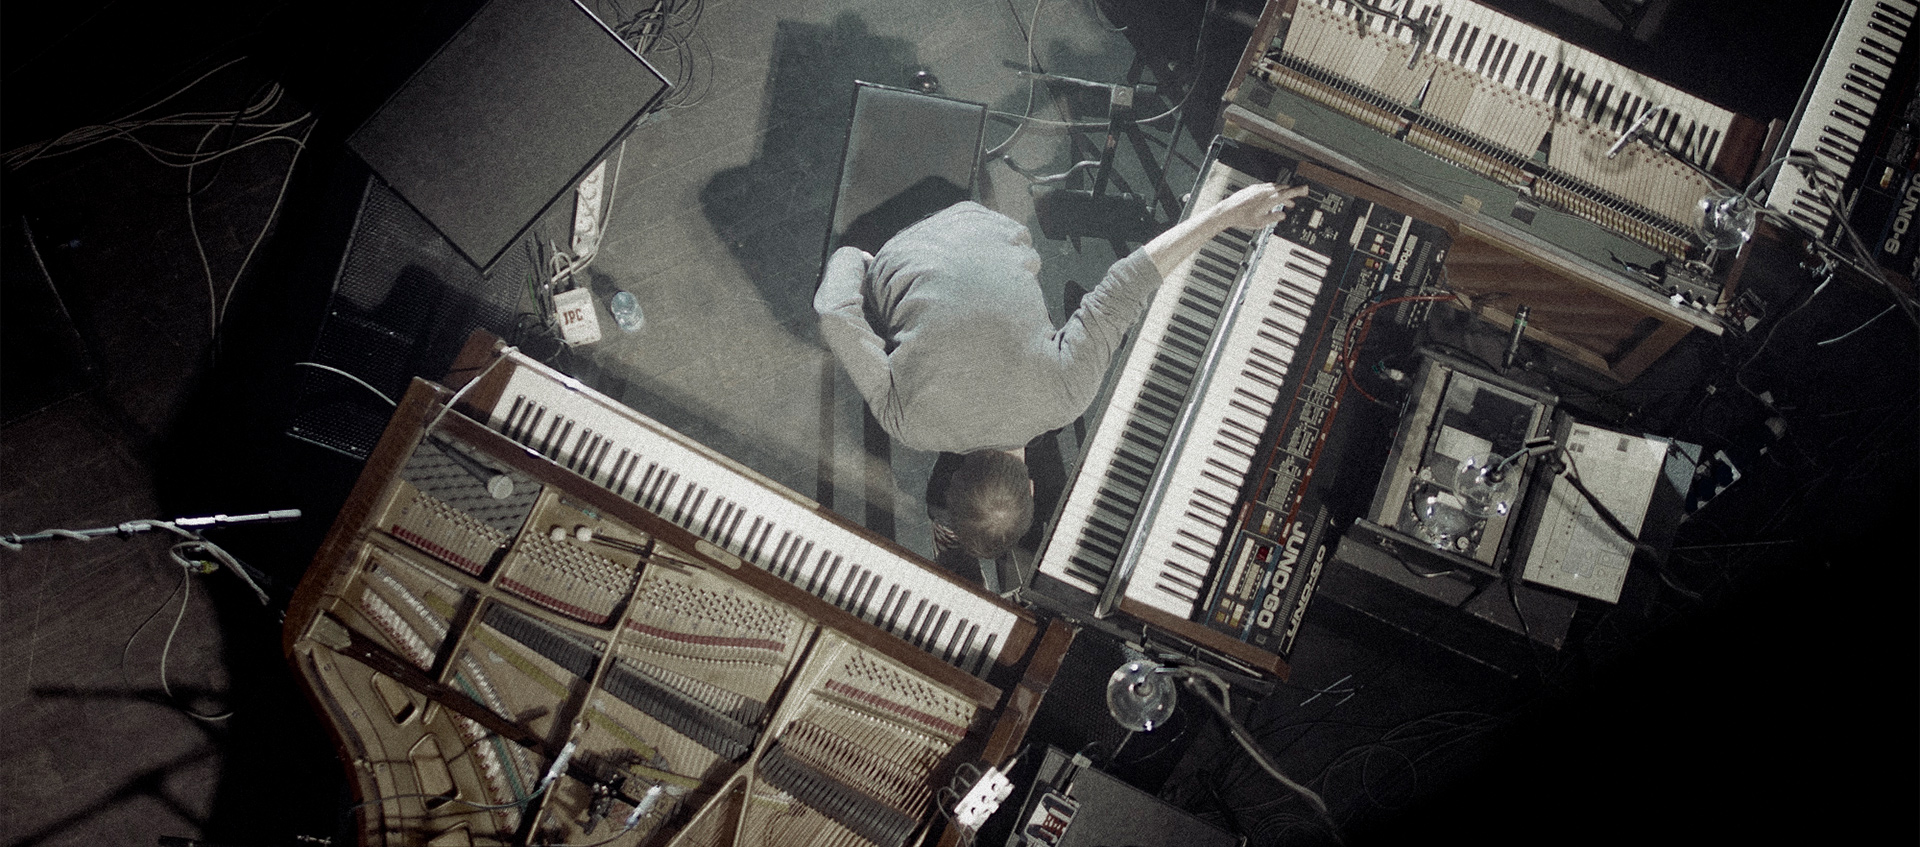 Arial shot of Nils Frahm playing piano